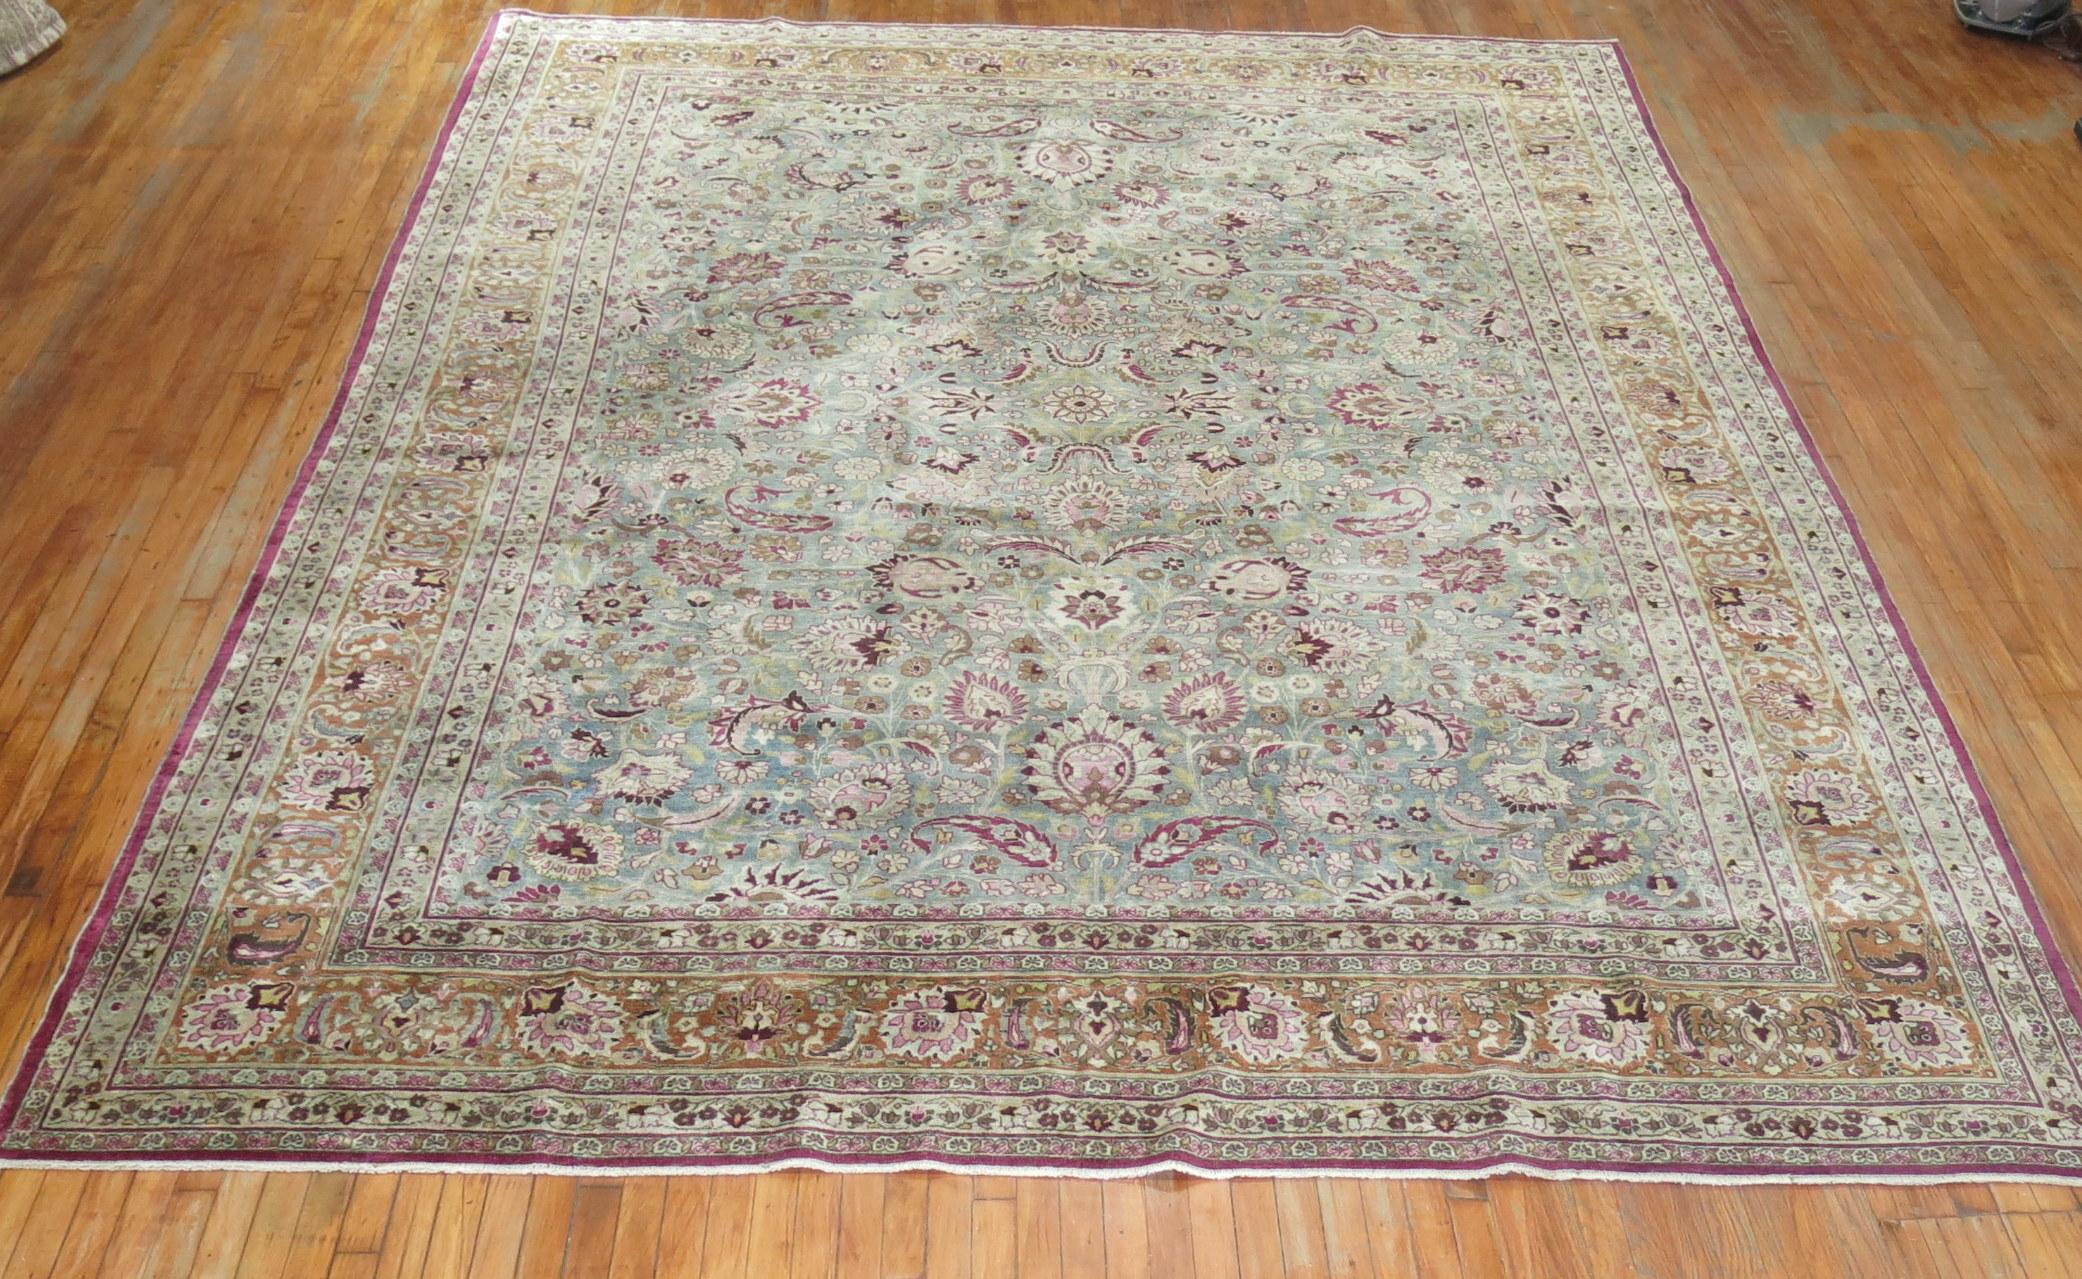 An early 20th century room size antique Persian Meshed rug.

9'9'' x 12'9''